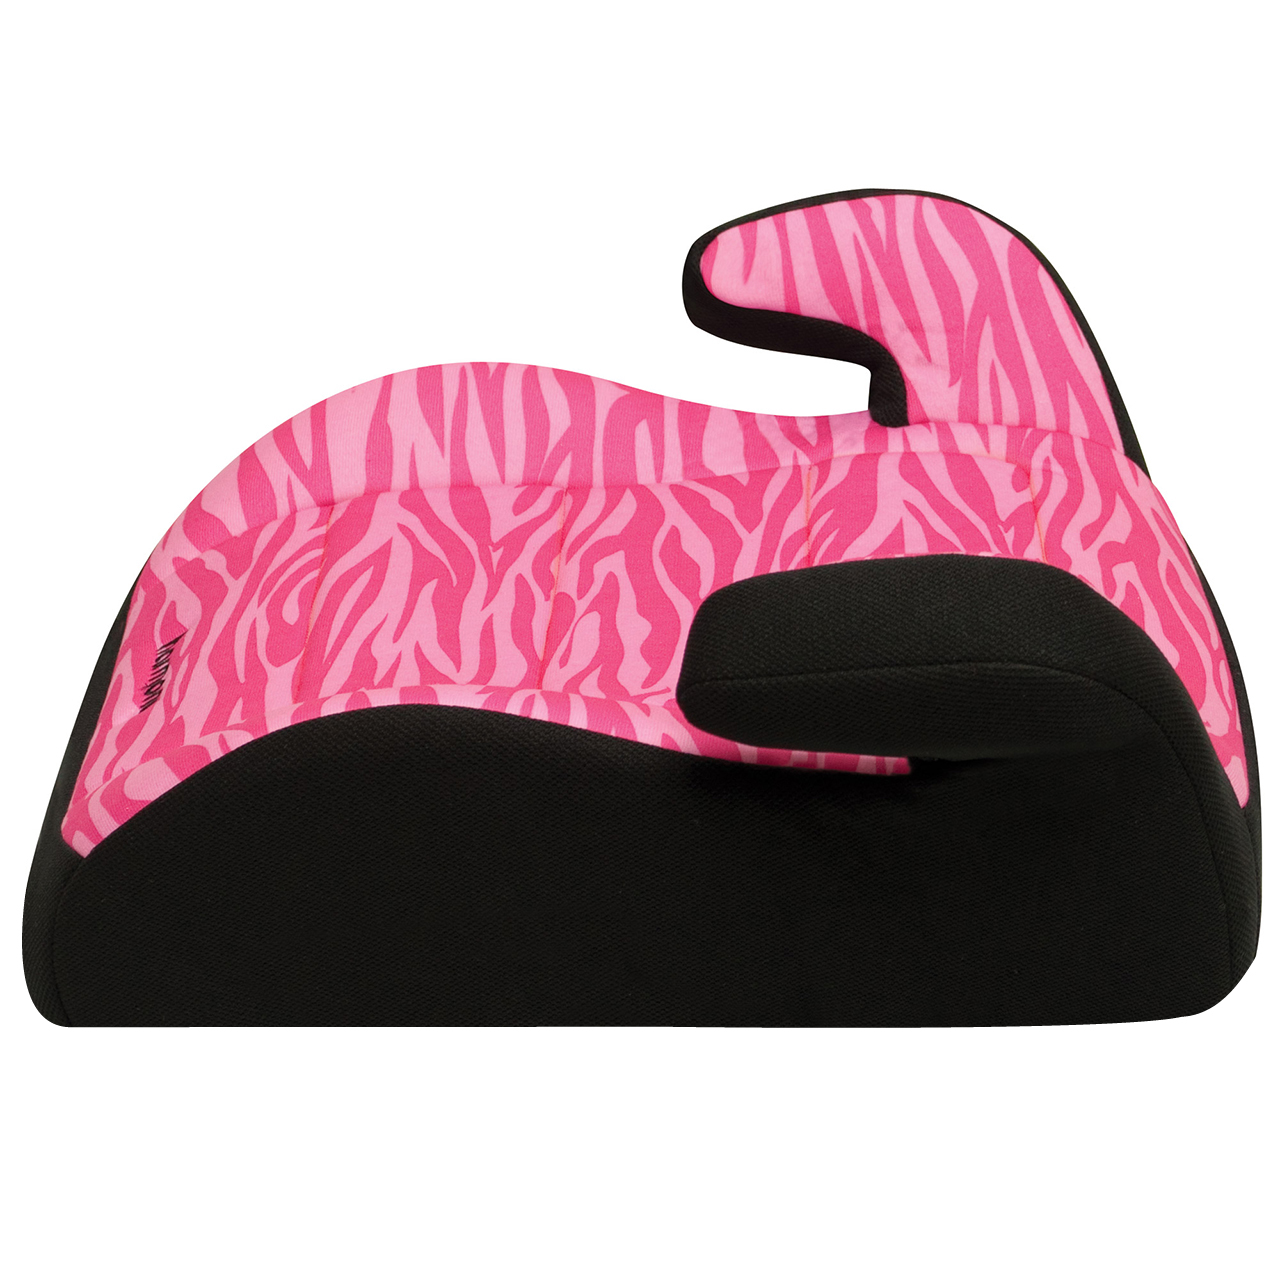 Harmony Juvenile Youth Backless Booster Car Seat, Pink Zebra - image 5 of 7